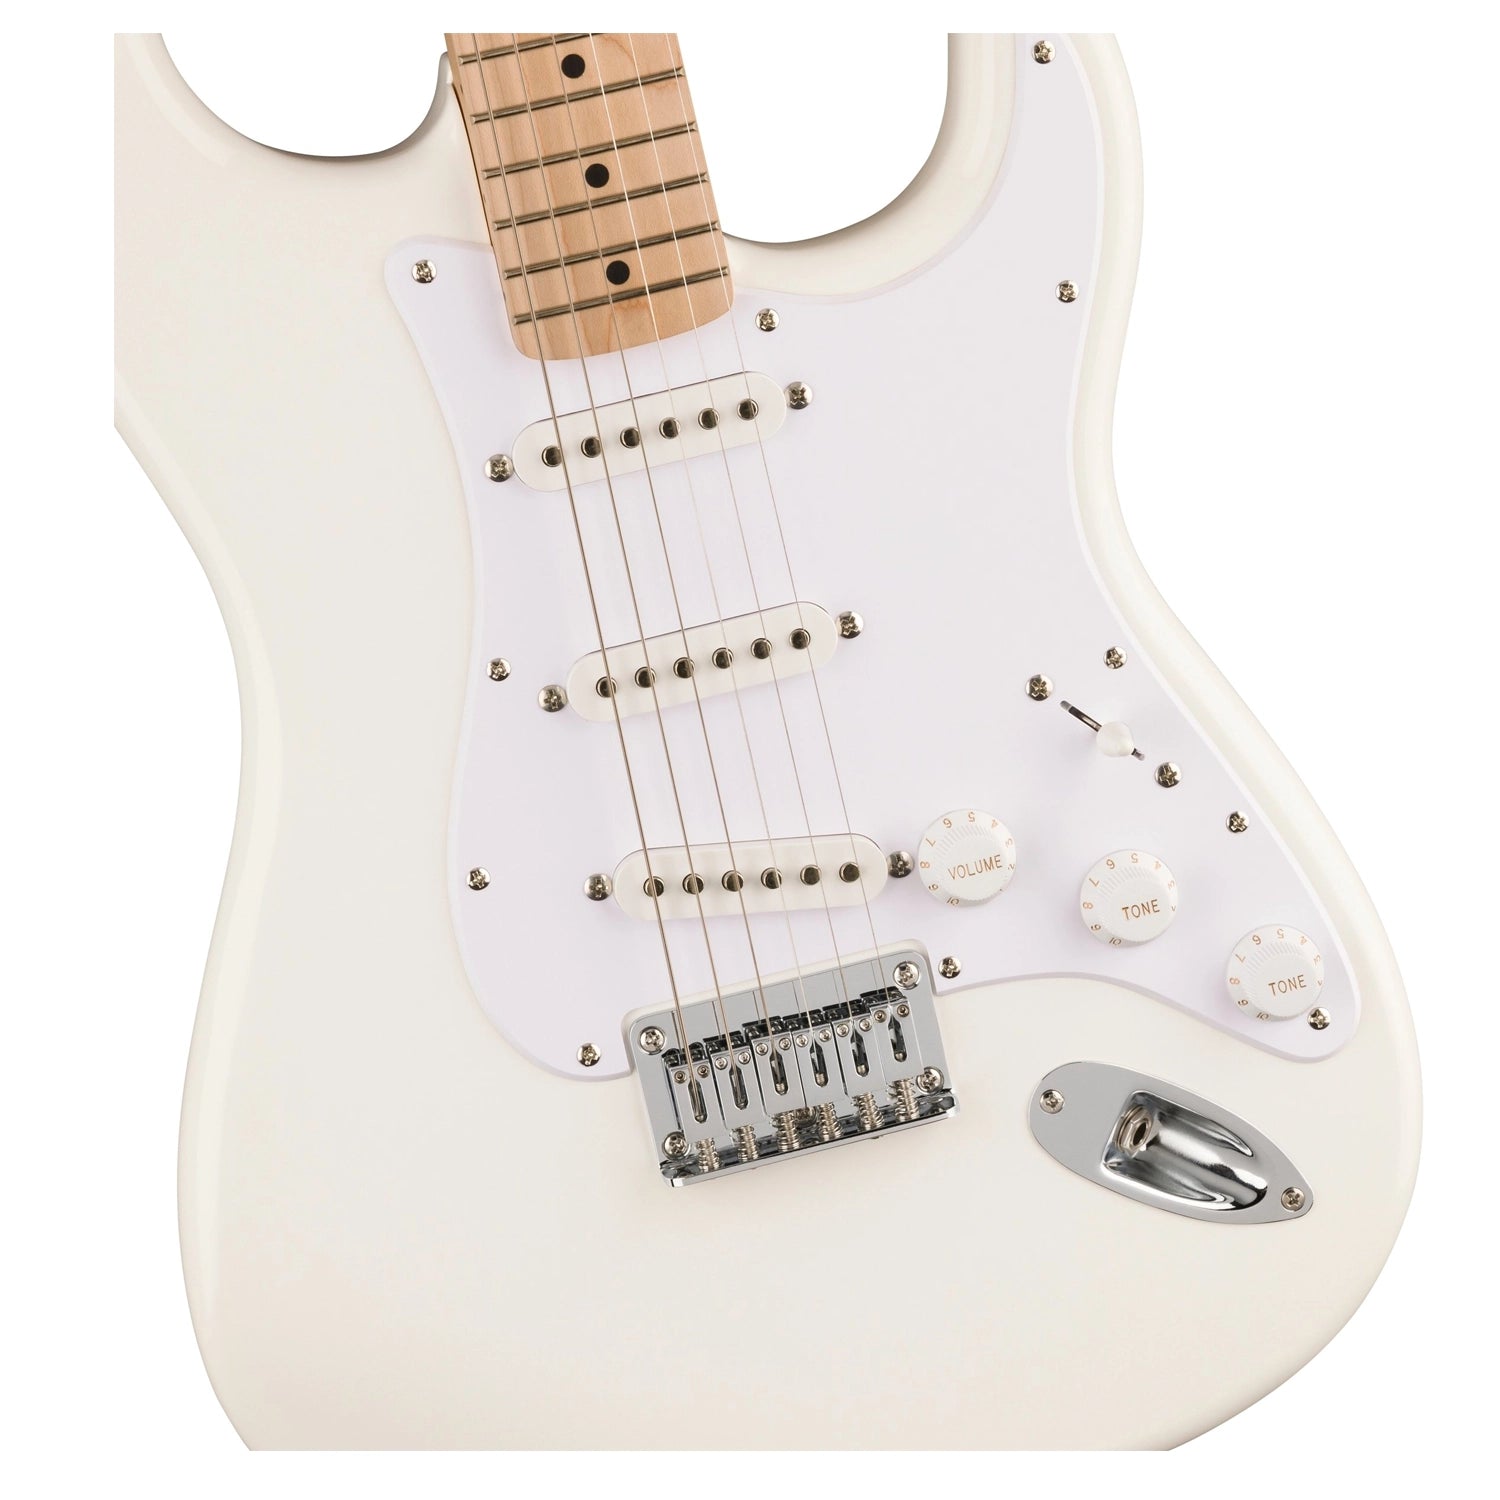 Squier Sonic Stratocaster Ht Electric Guitar  - White